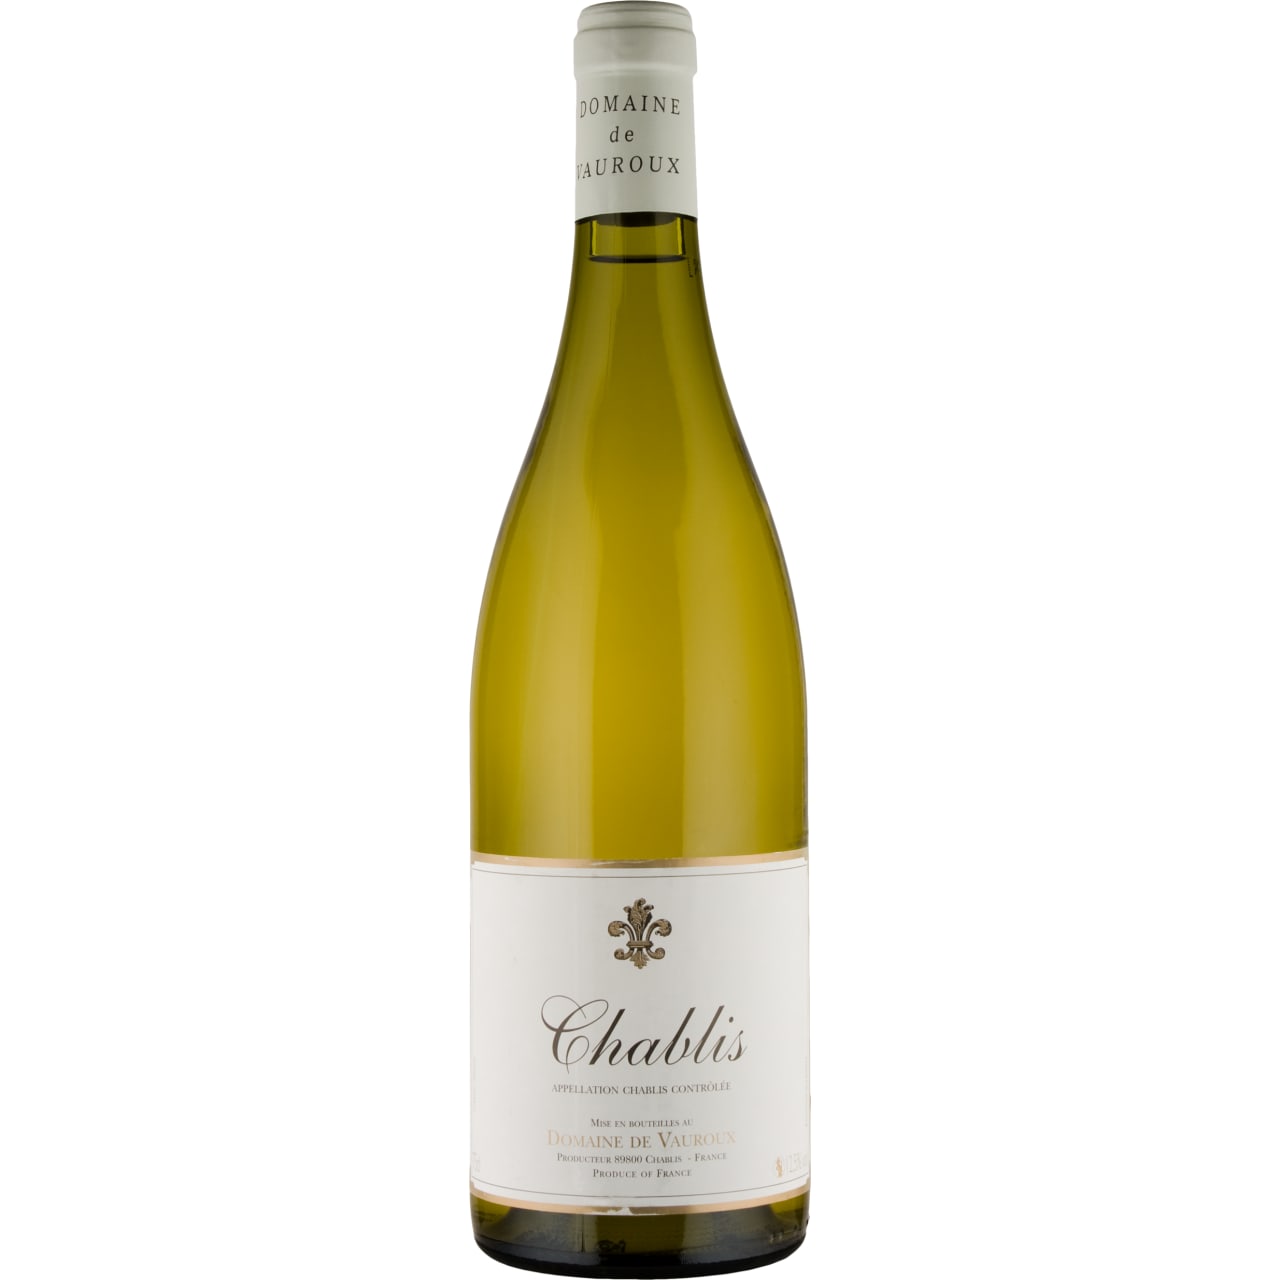 A softer style of Chablis with apple and citrus character.